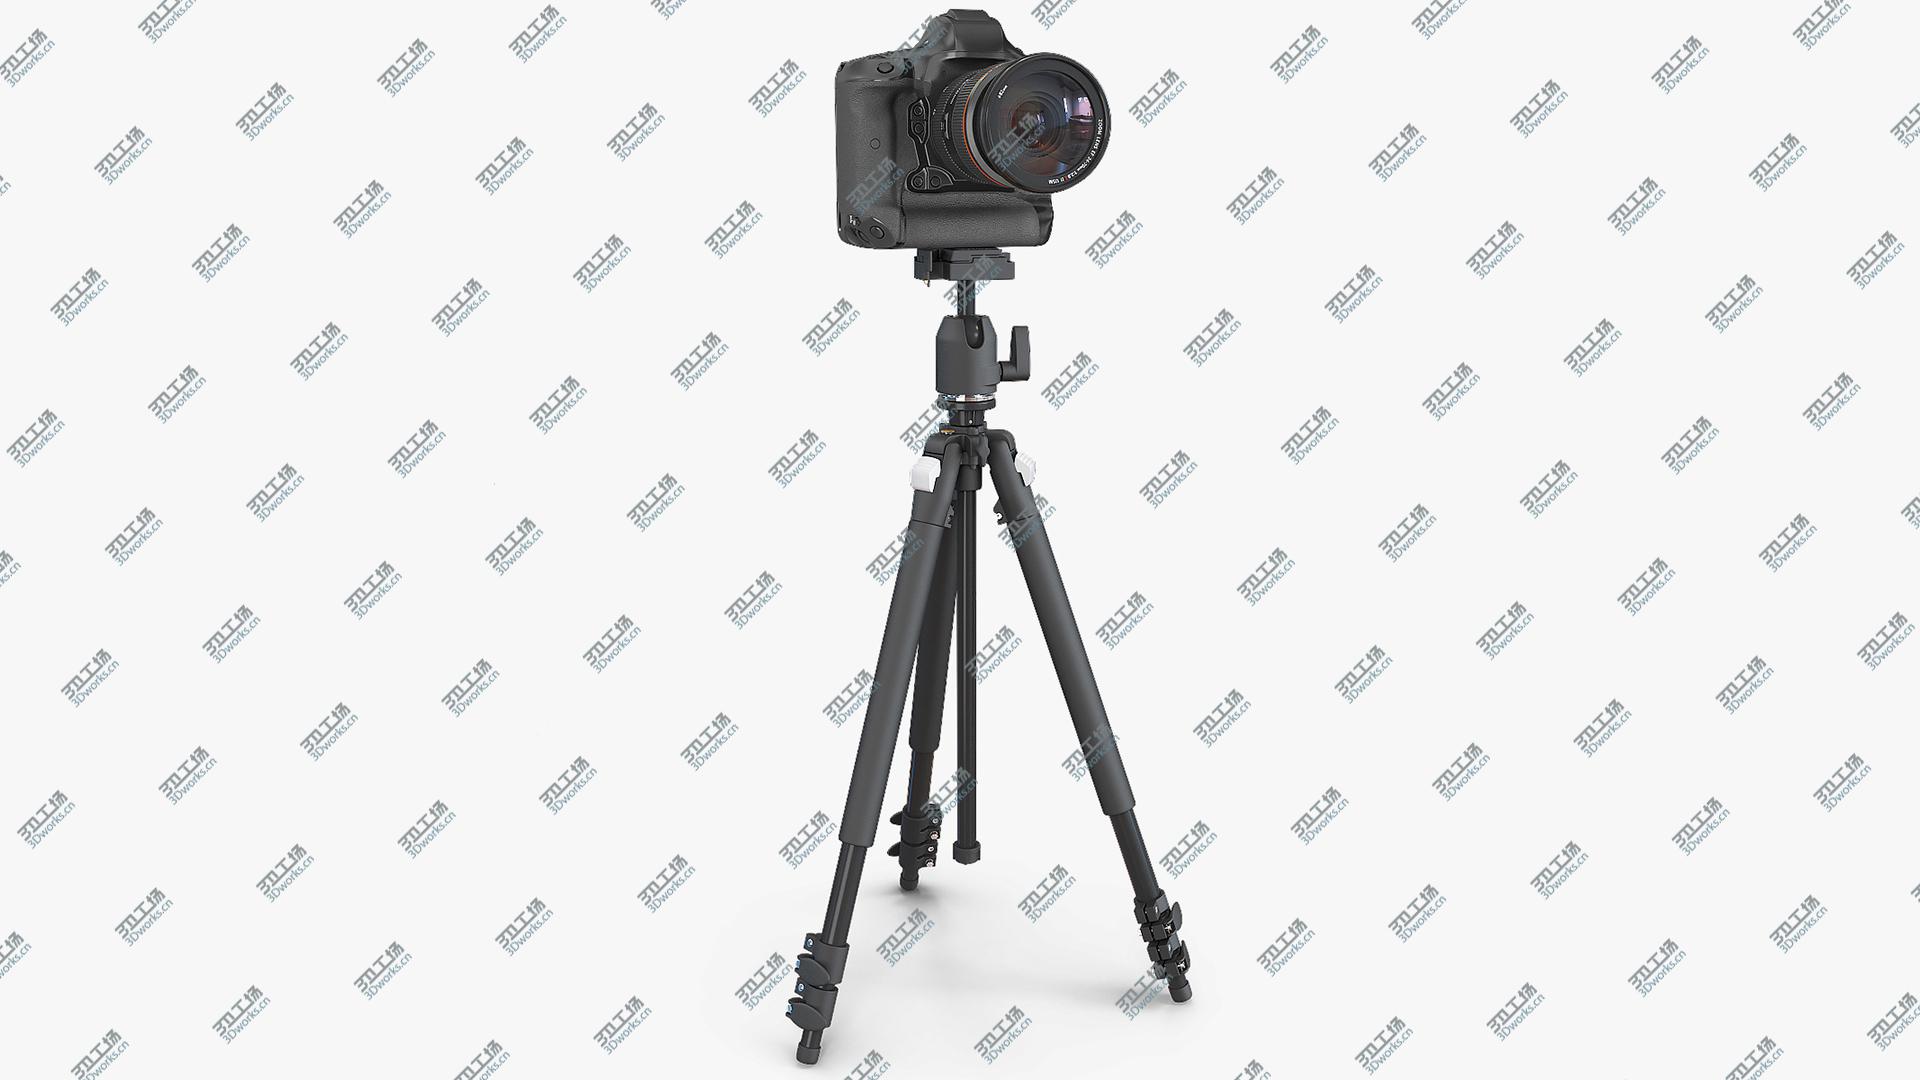 images/goods_img/20210319/DSLR Camera with Zoom on Tripod 3D model/1.jpg